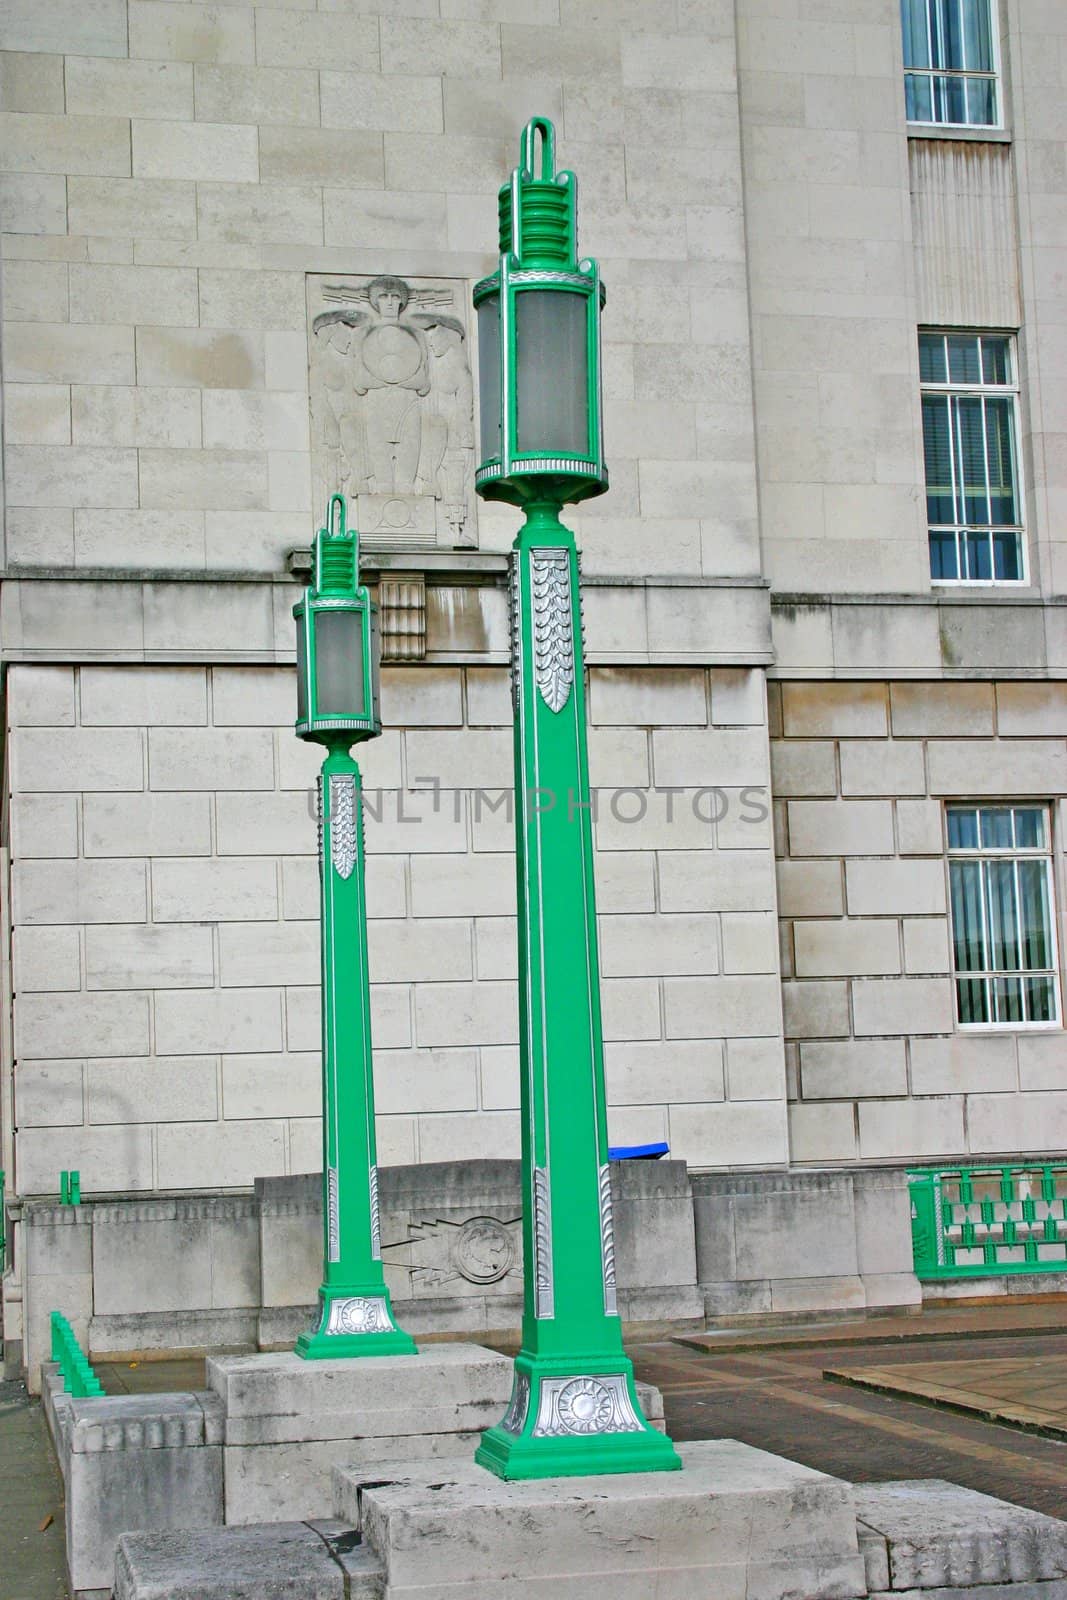 1920s Art Deco Street Lamps by green308